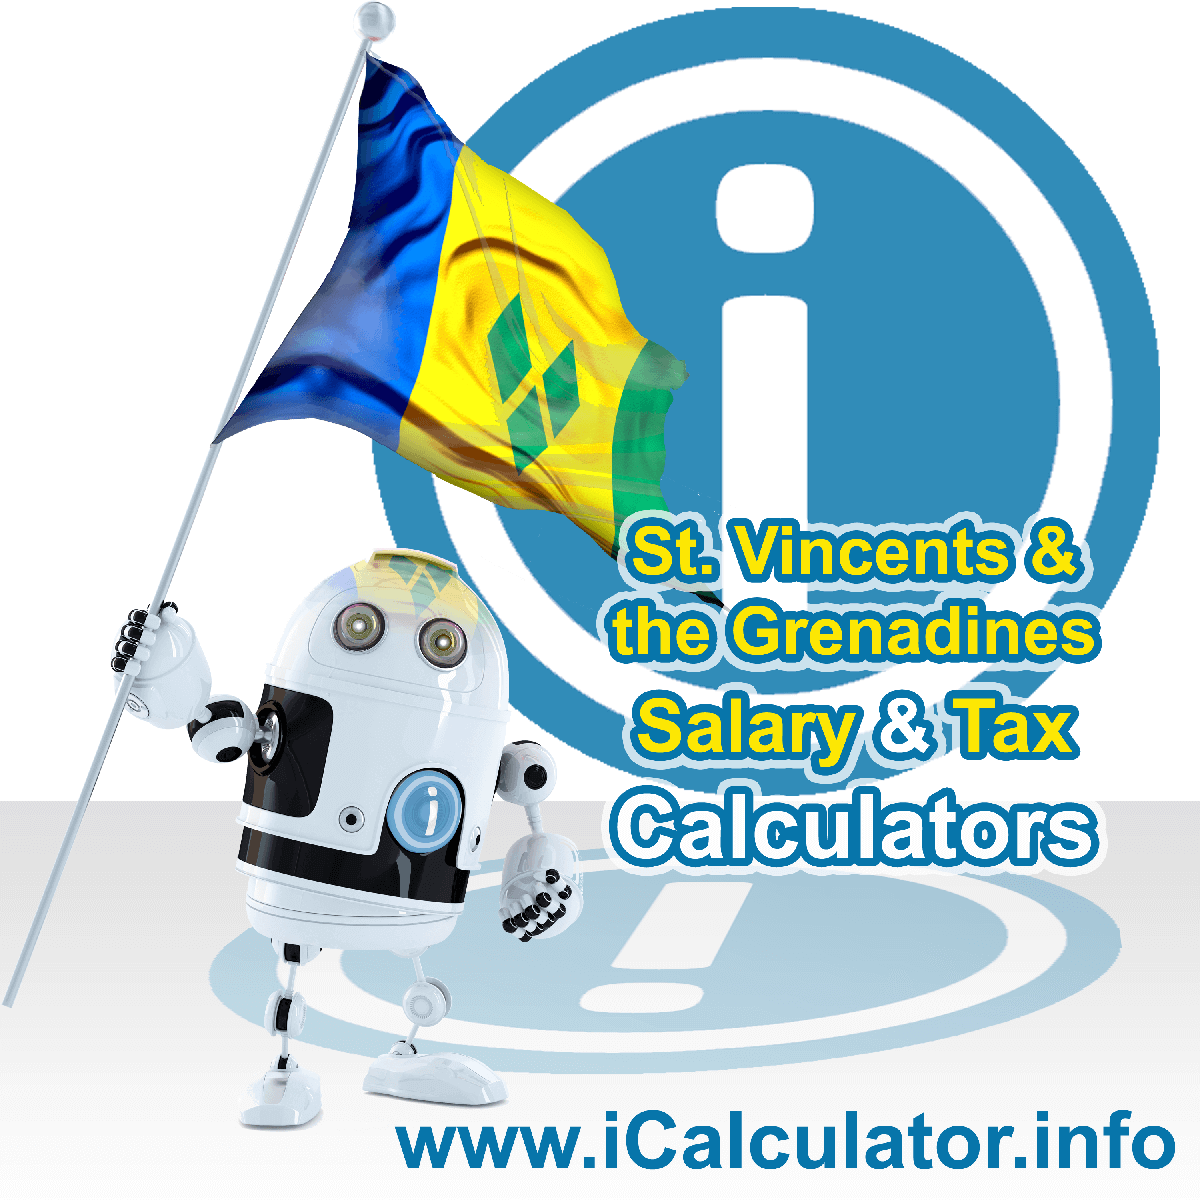 Saint Vincent And The Grenadines Wage Calculator. This image shows the Saint Vincent And The Grenadines flag and information relating to the tax formula for the Saint Vincent And The Grenadines Tax Calculator